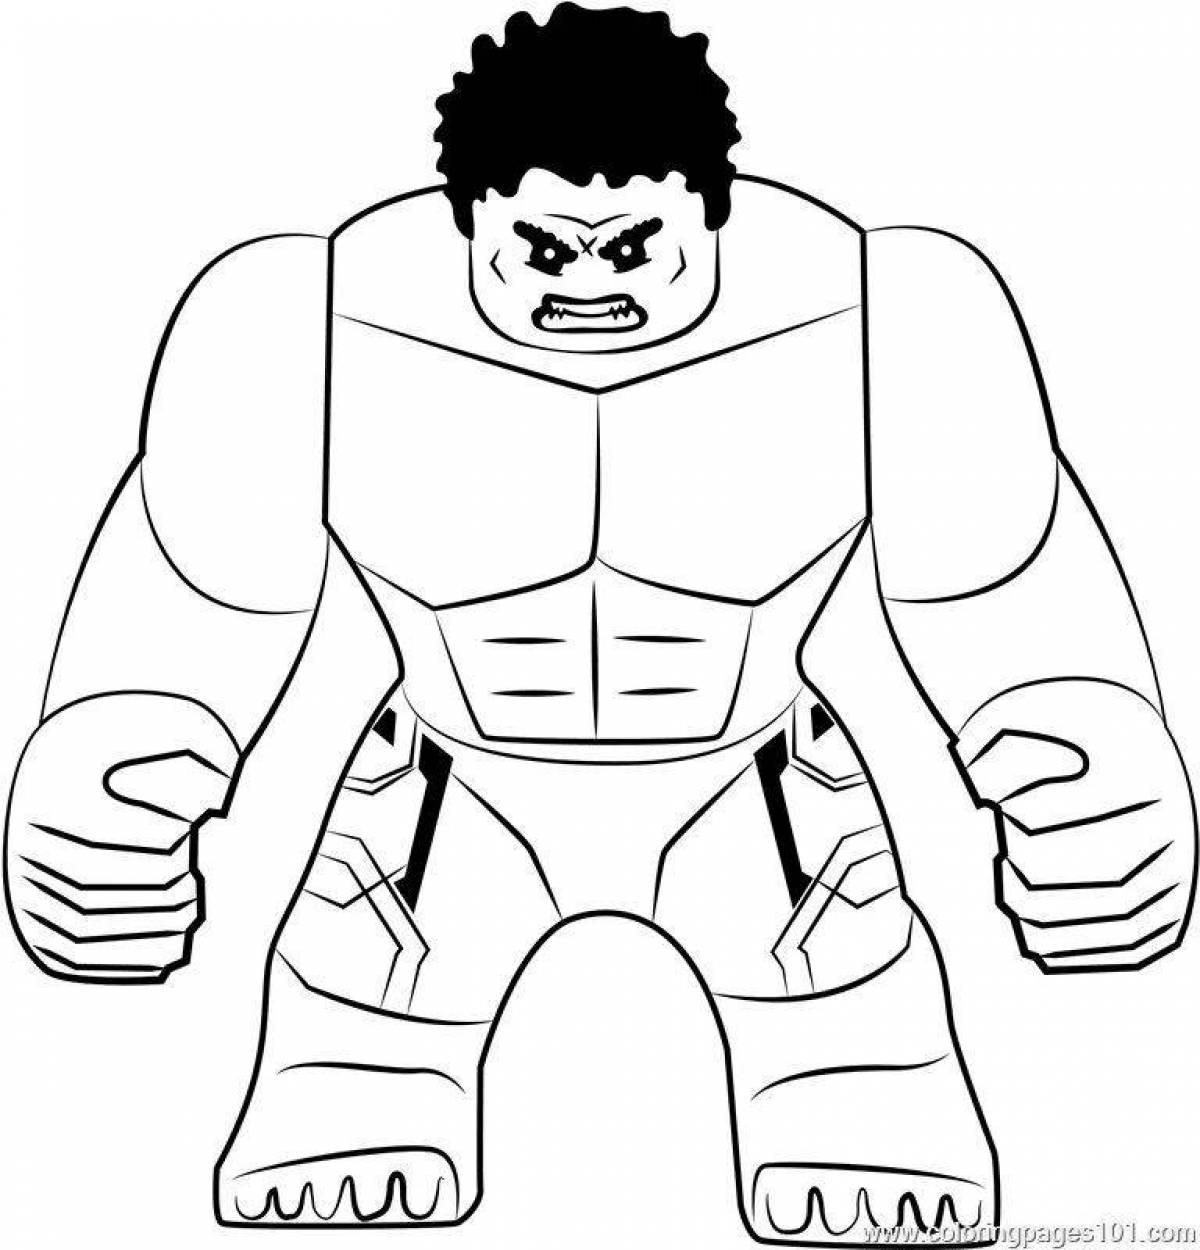 Cute hulk coloring book for kids 6-7 years old